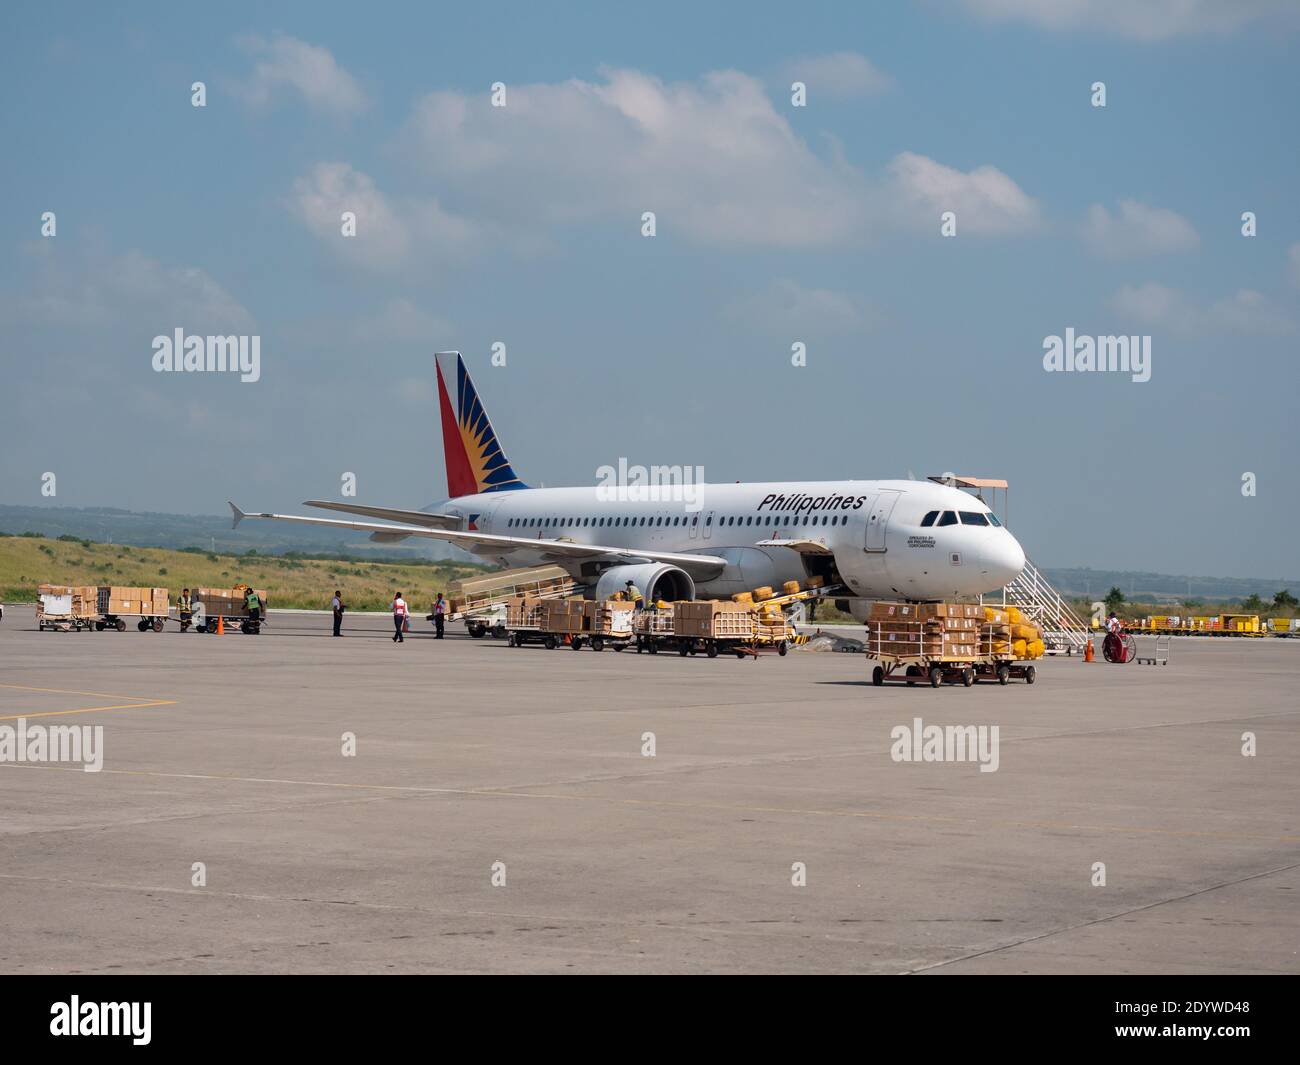 Philippine Airlines Airbus A320 being loaded with cargo at General Santos International Airport in General Santos City, South Cotabato, the Philippine Stock Photo